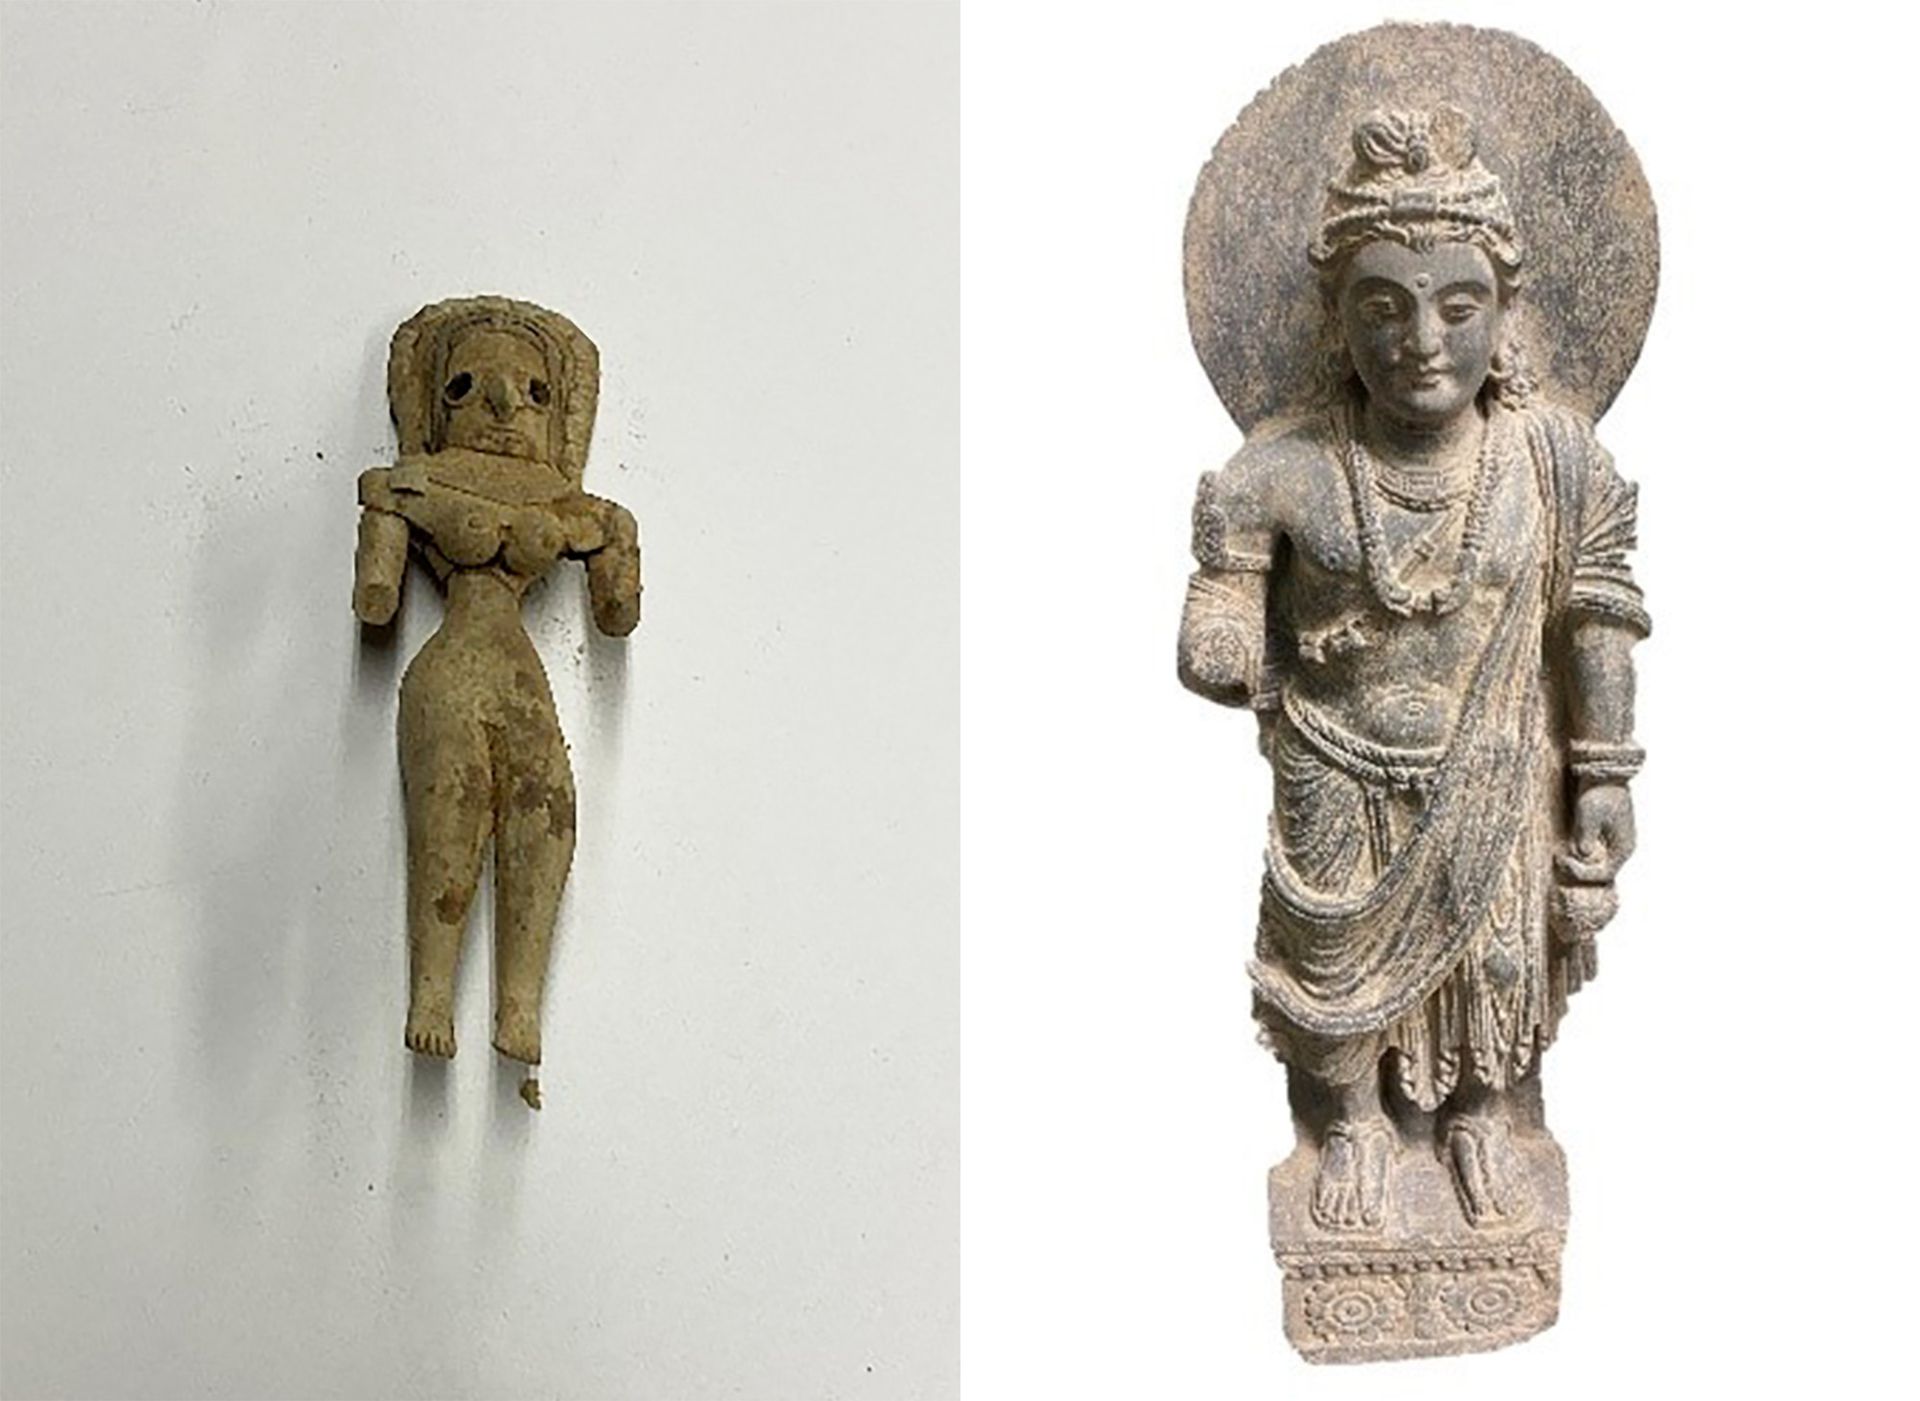 One of the seized Mehrgarh dolls (left) and the Gandharan statue of a maitreya (right) being returned to Pakistan. Courtesy of the Manhattan district attorney's office.